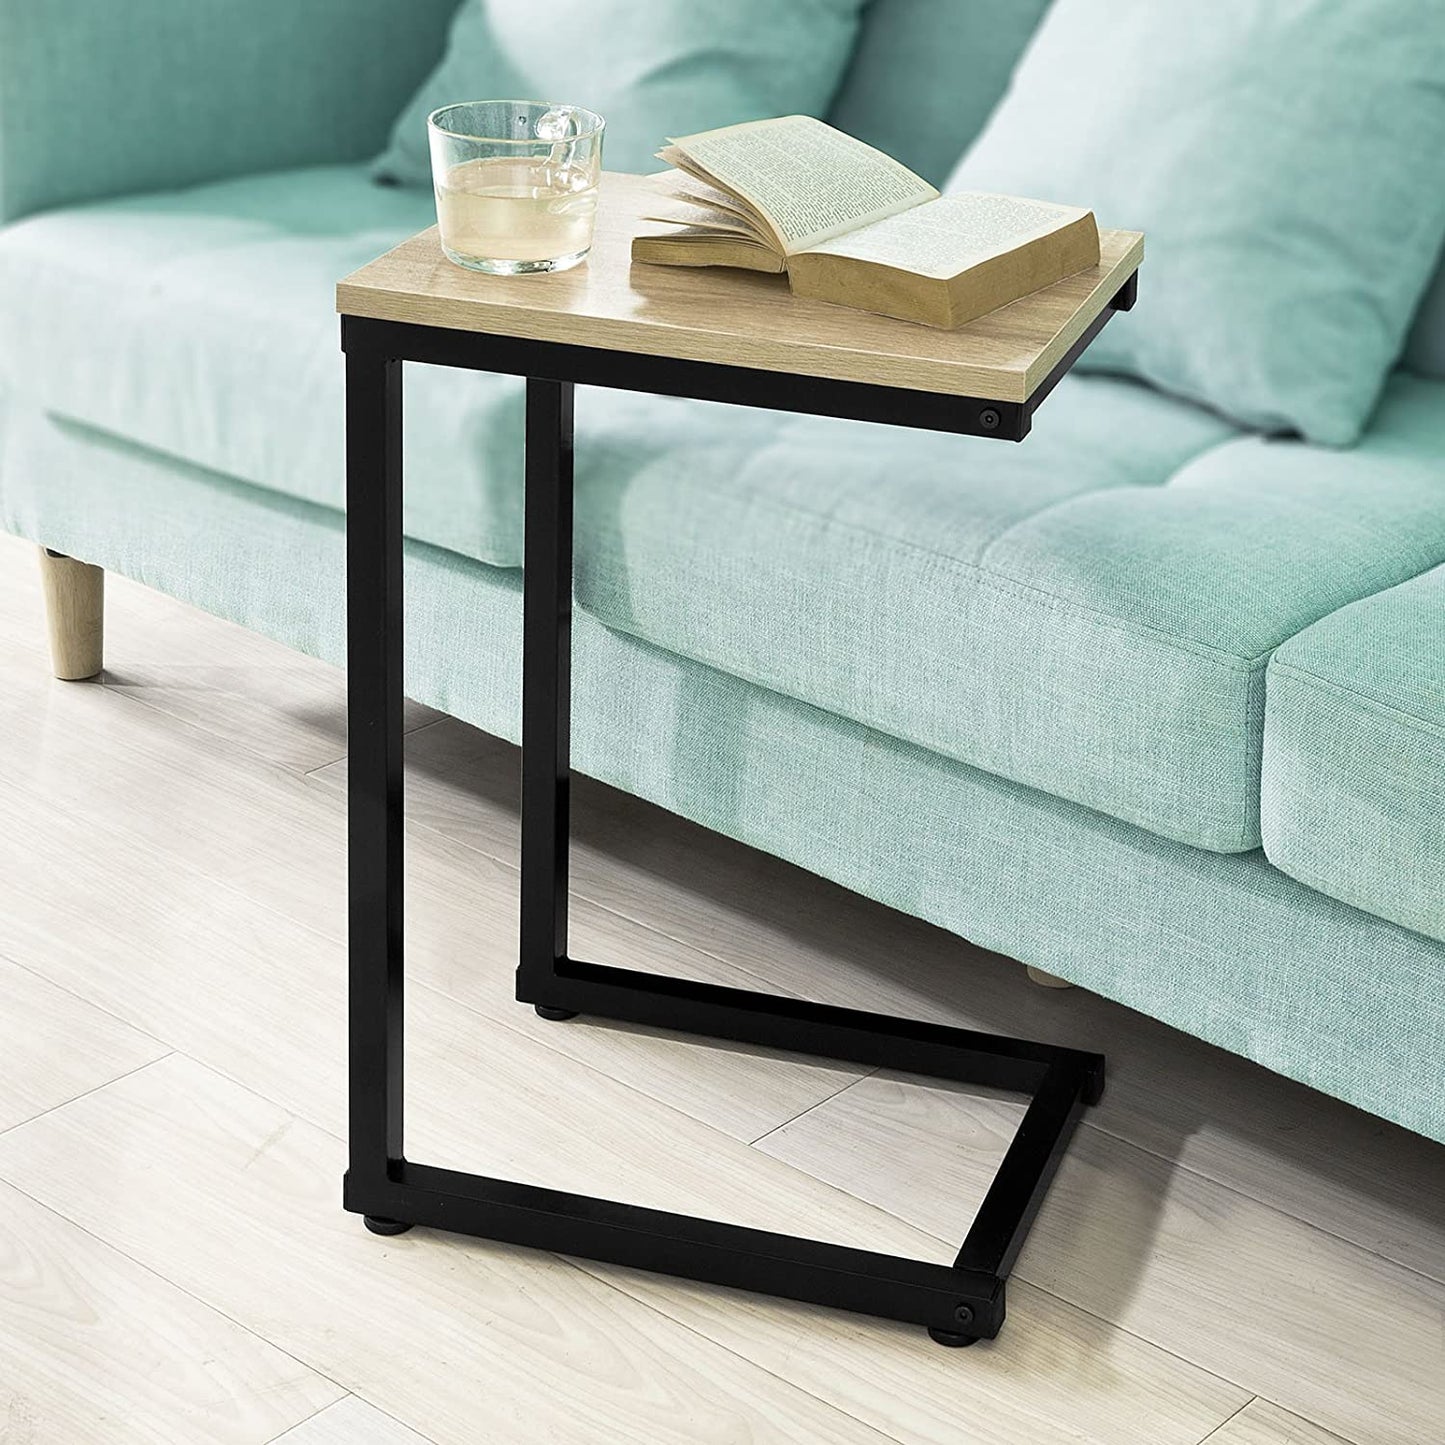 Sofa Side Table for Coffee time - image7